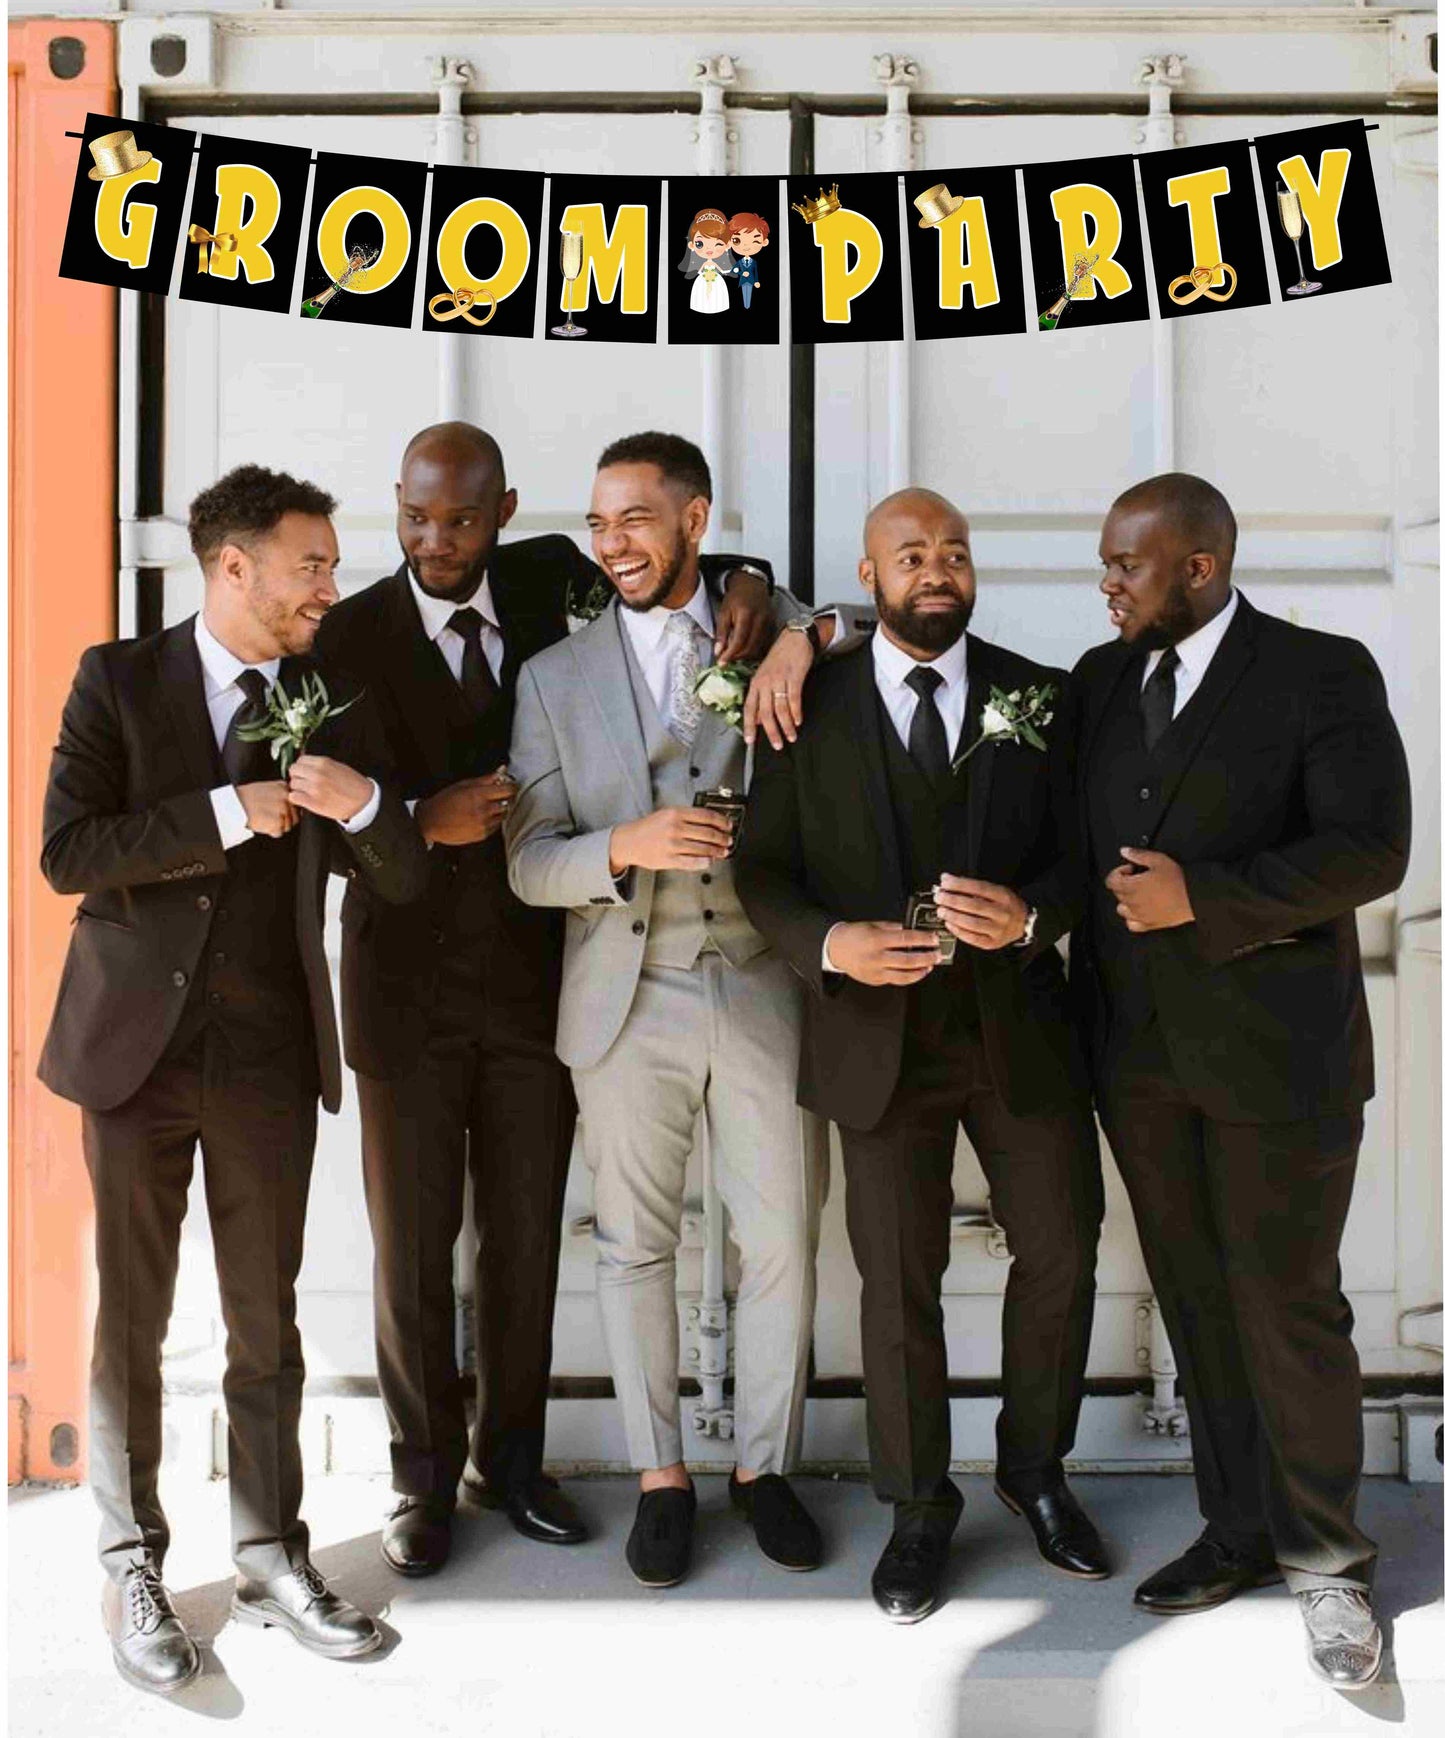 Groom Party Banner for Photo Shoot Backdrop and Theme Party